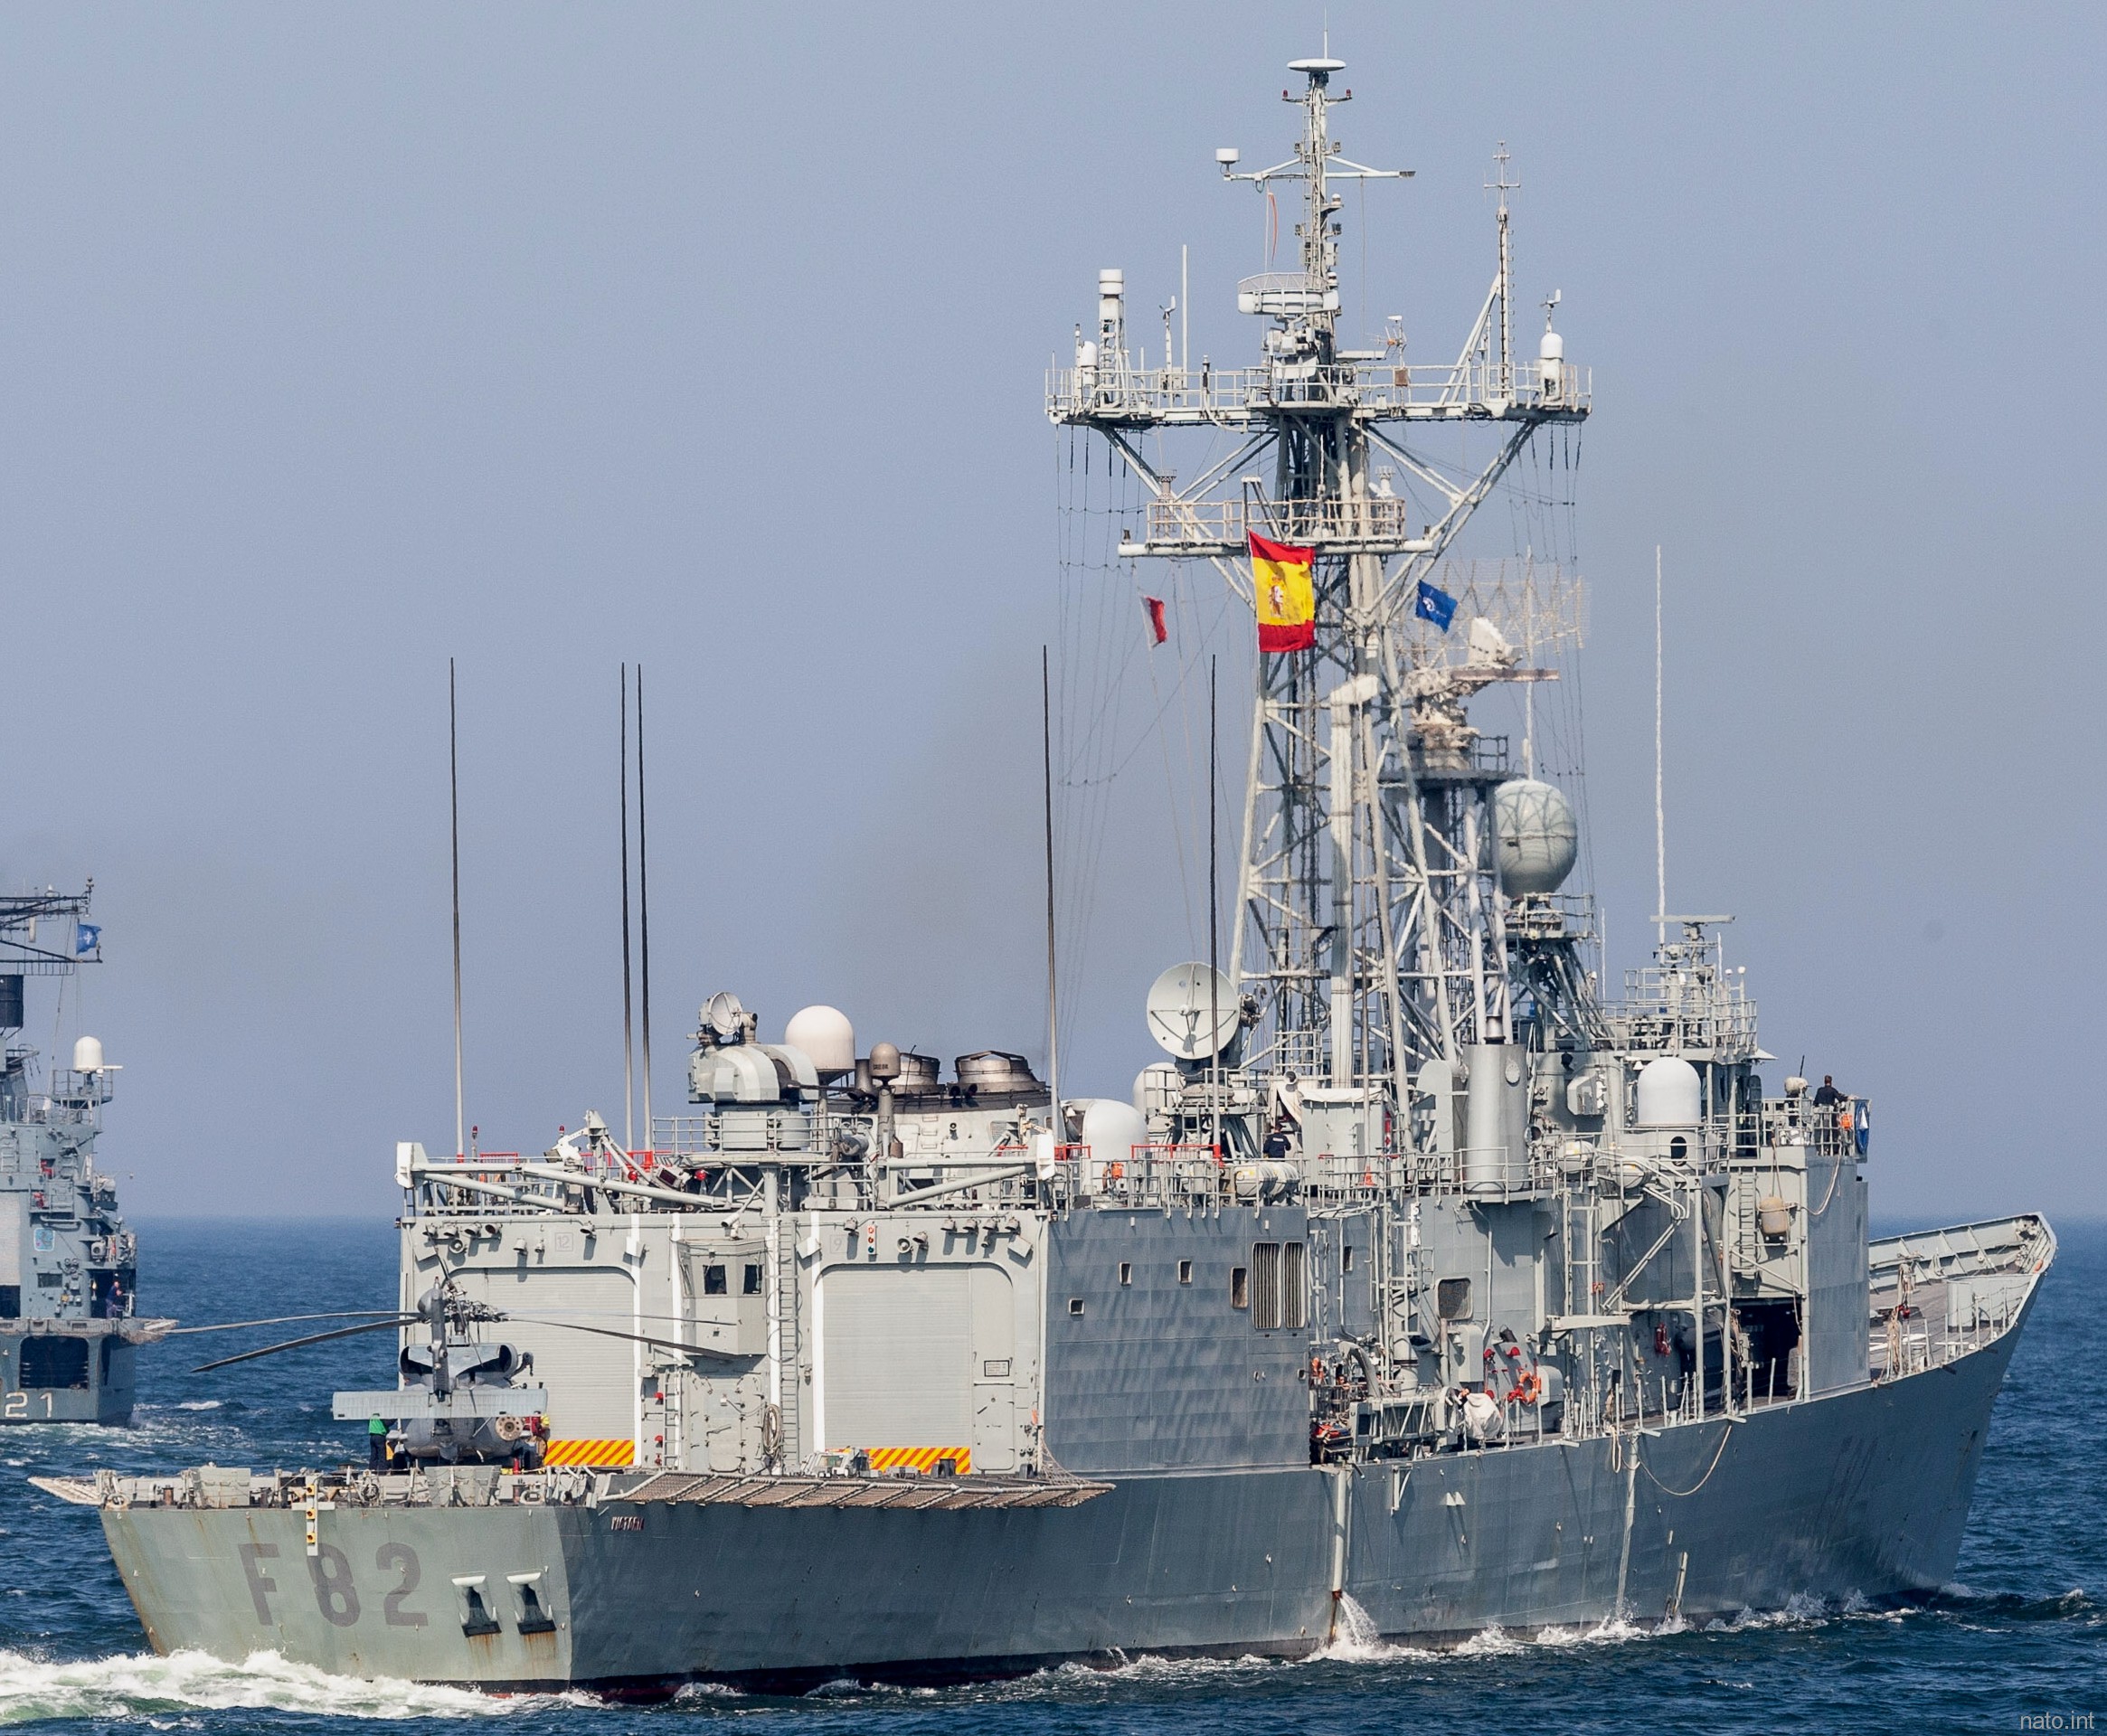 f-82 sps victoria santa maria f80 class guided missile frigate spanish navy 02x